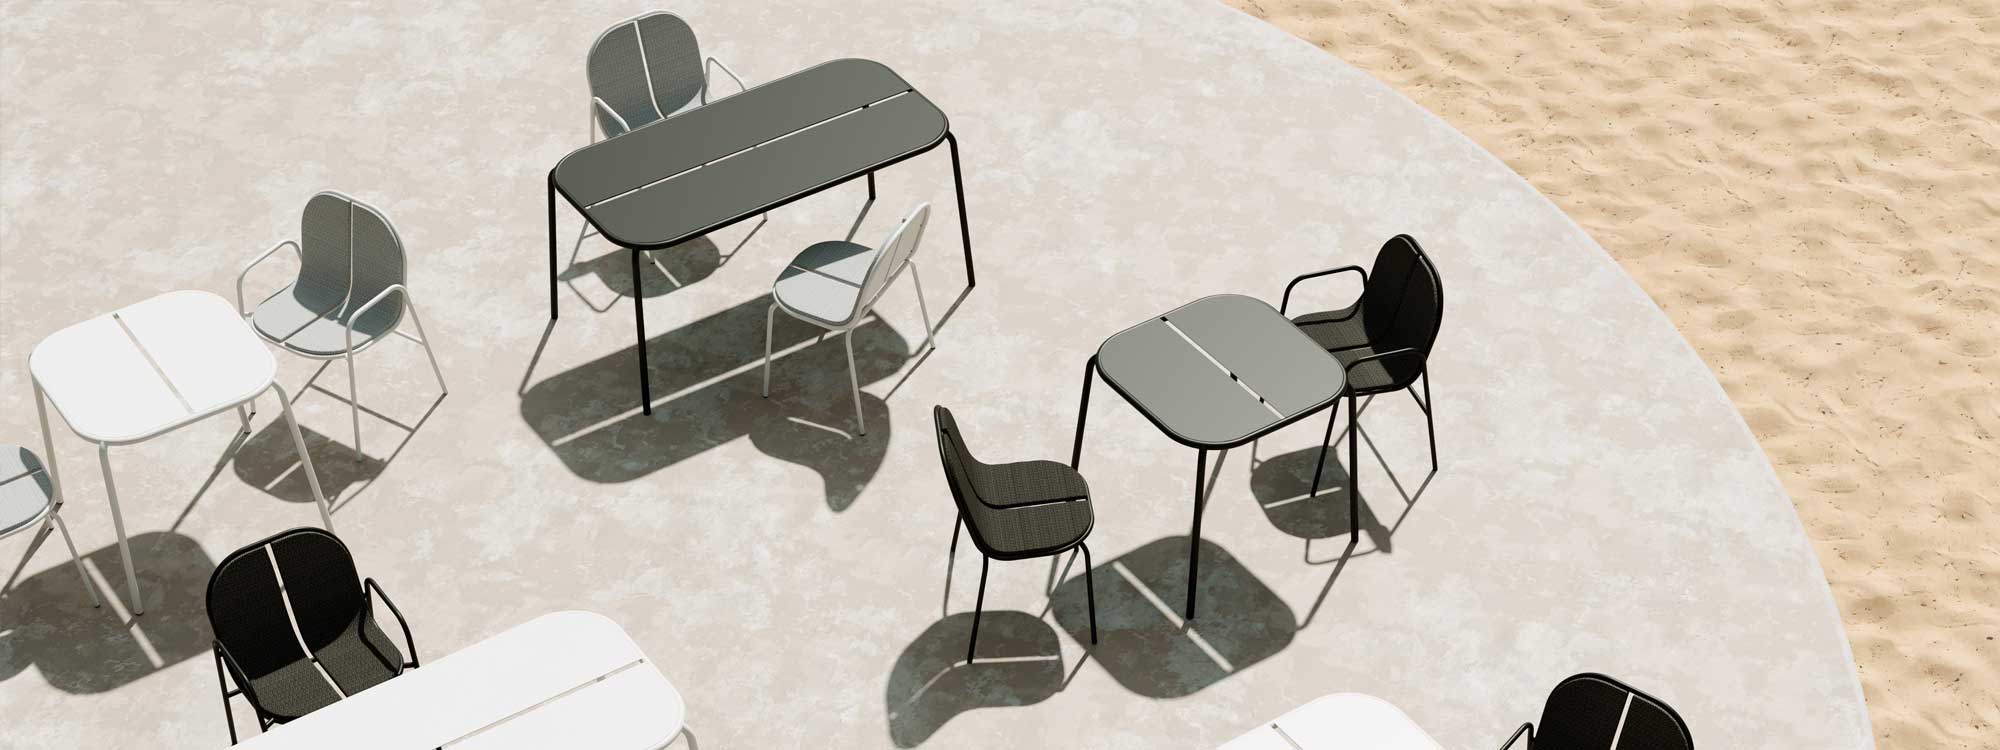 Image of birdseye view of Oiside Parc outdoor dining sets in black and white aluminium, shown on sunny terrace